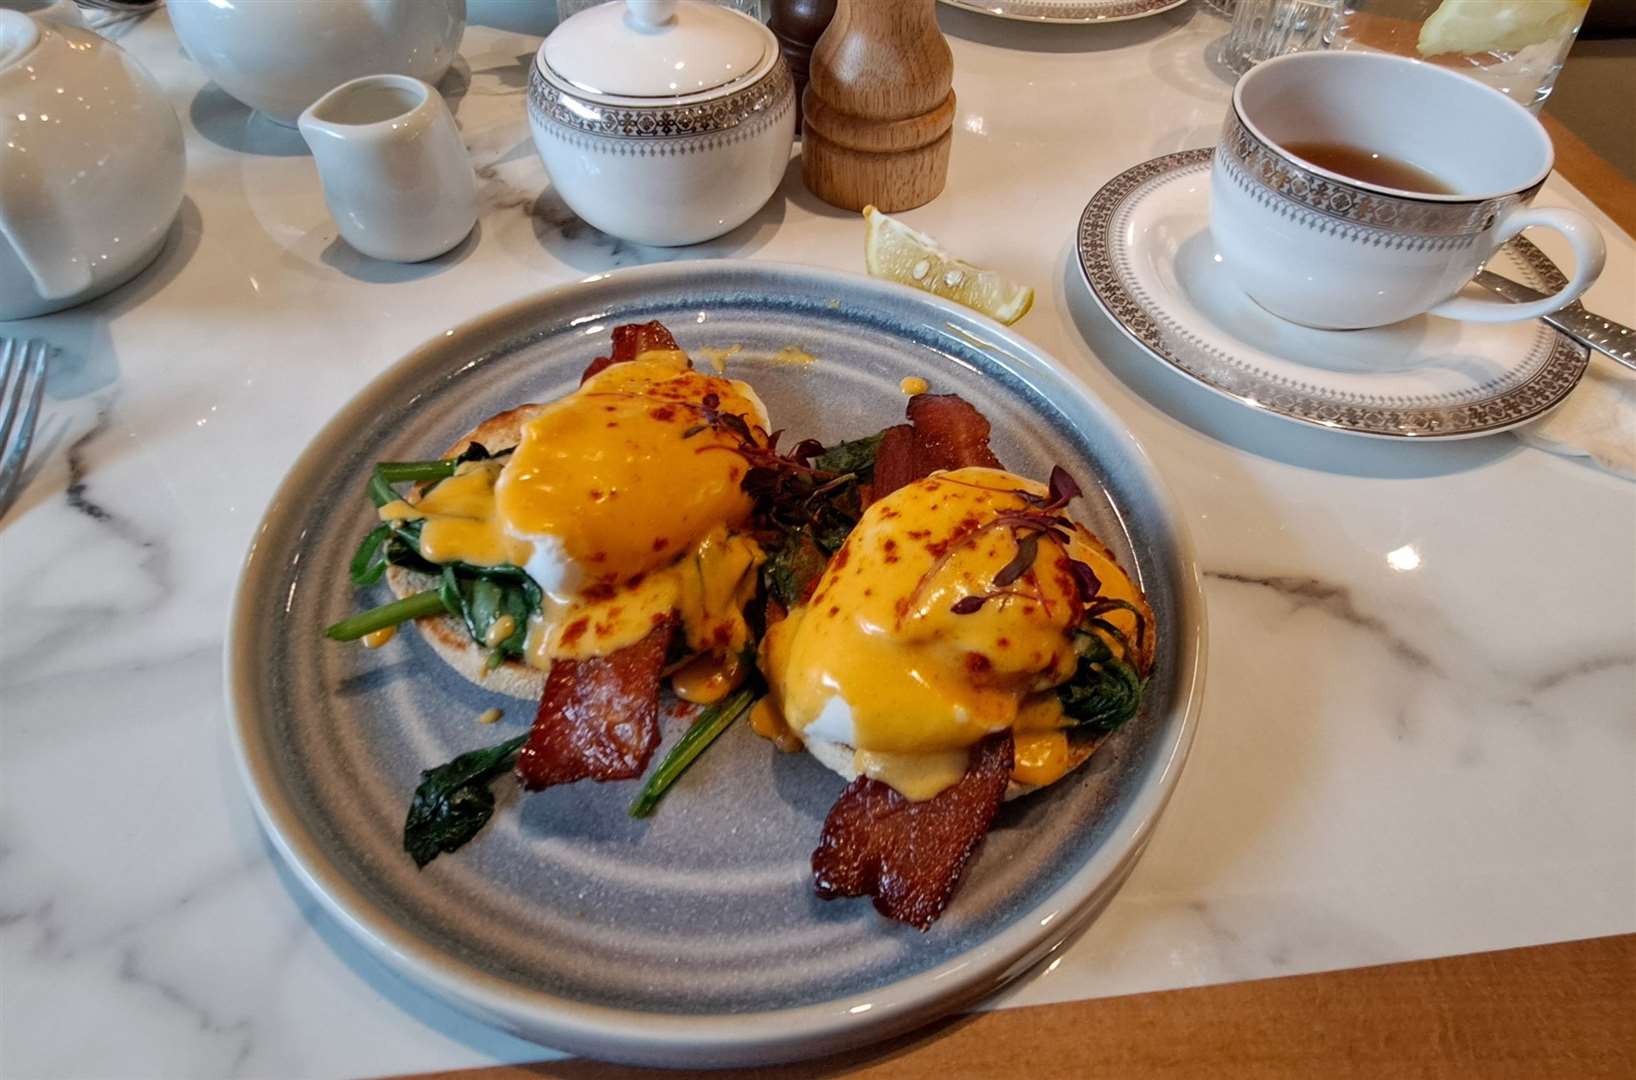 The eggs benedict with bacon